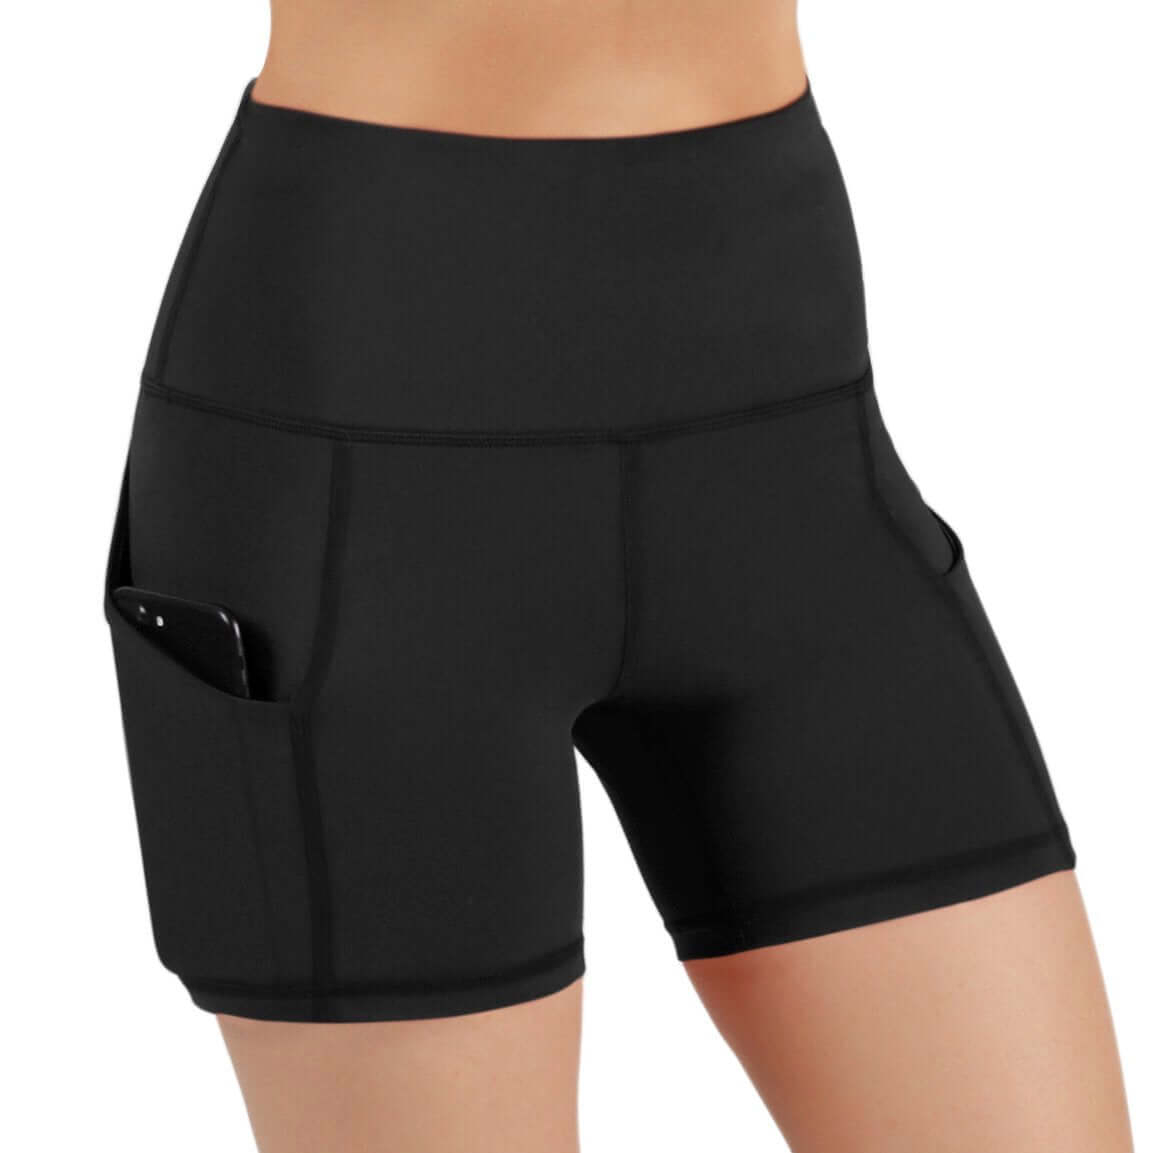 Jolie High-Waisted Athletic Shorts With Hip Pockets - Black, X-Small